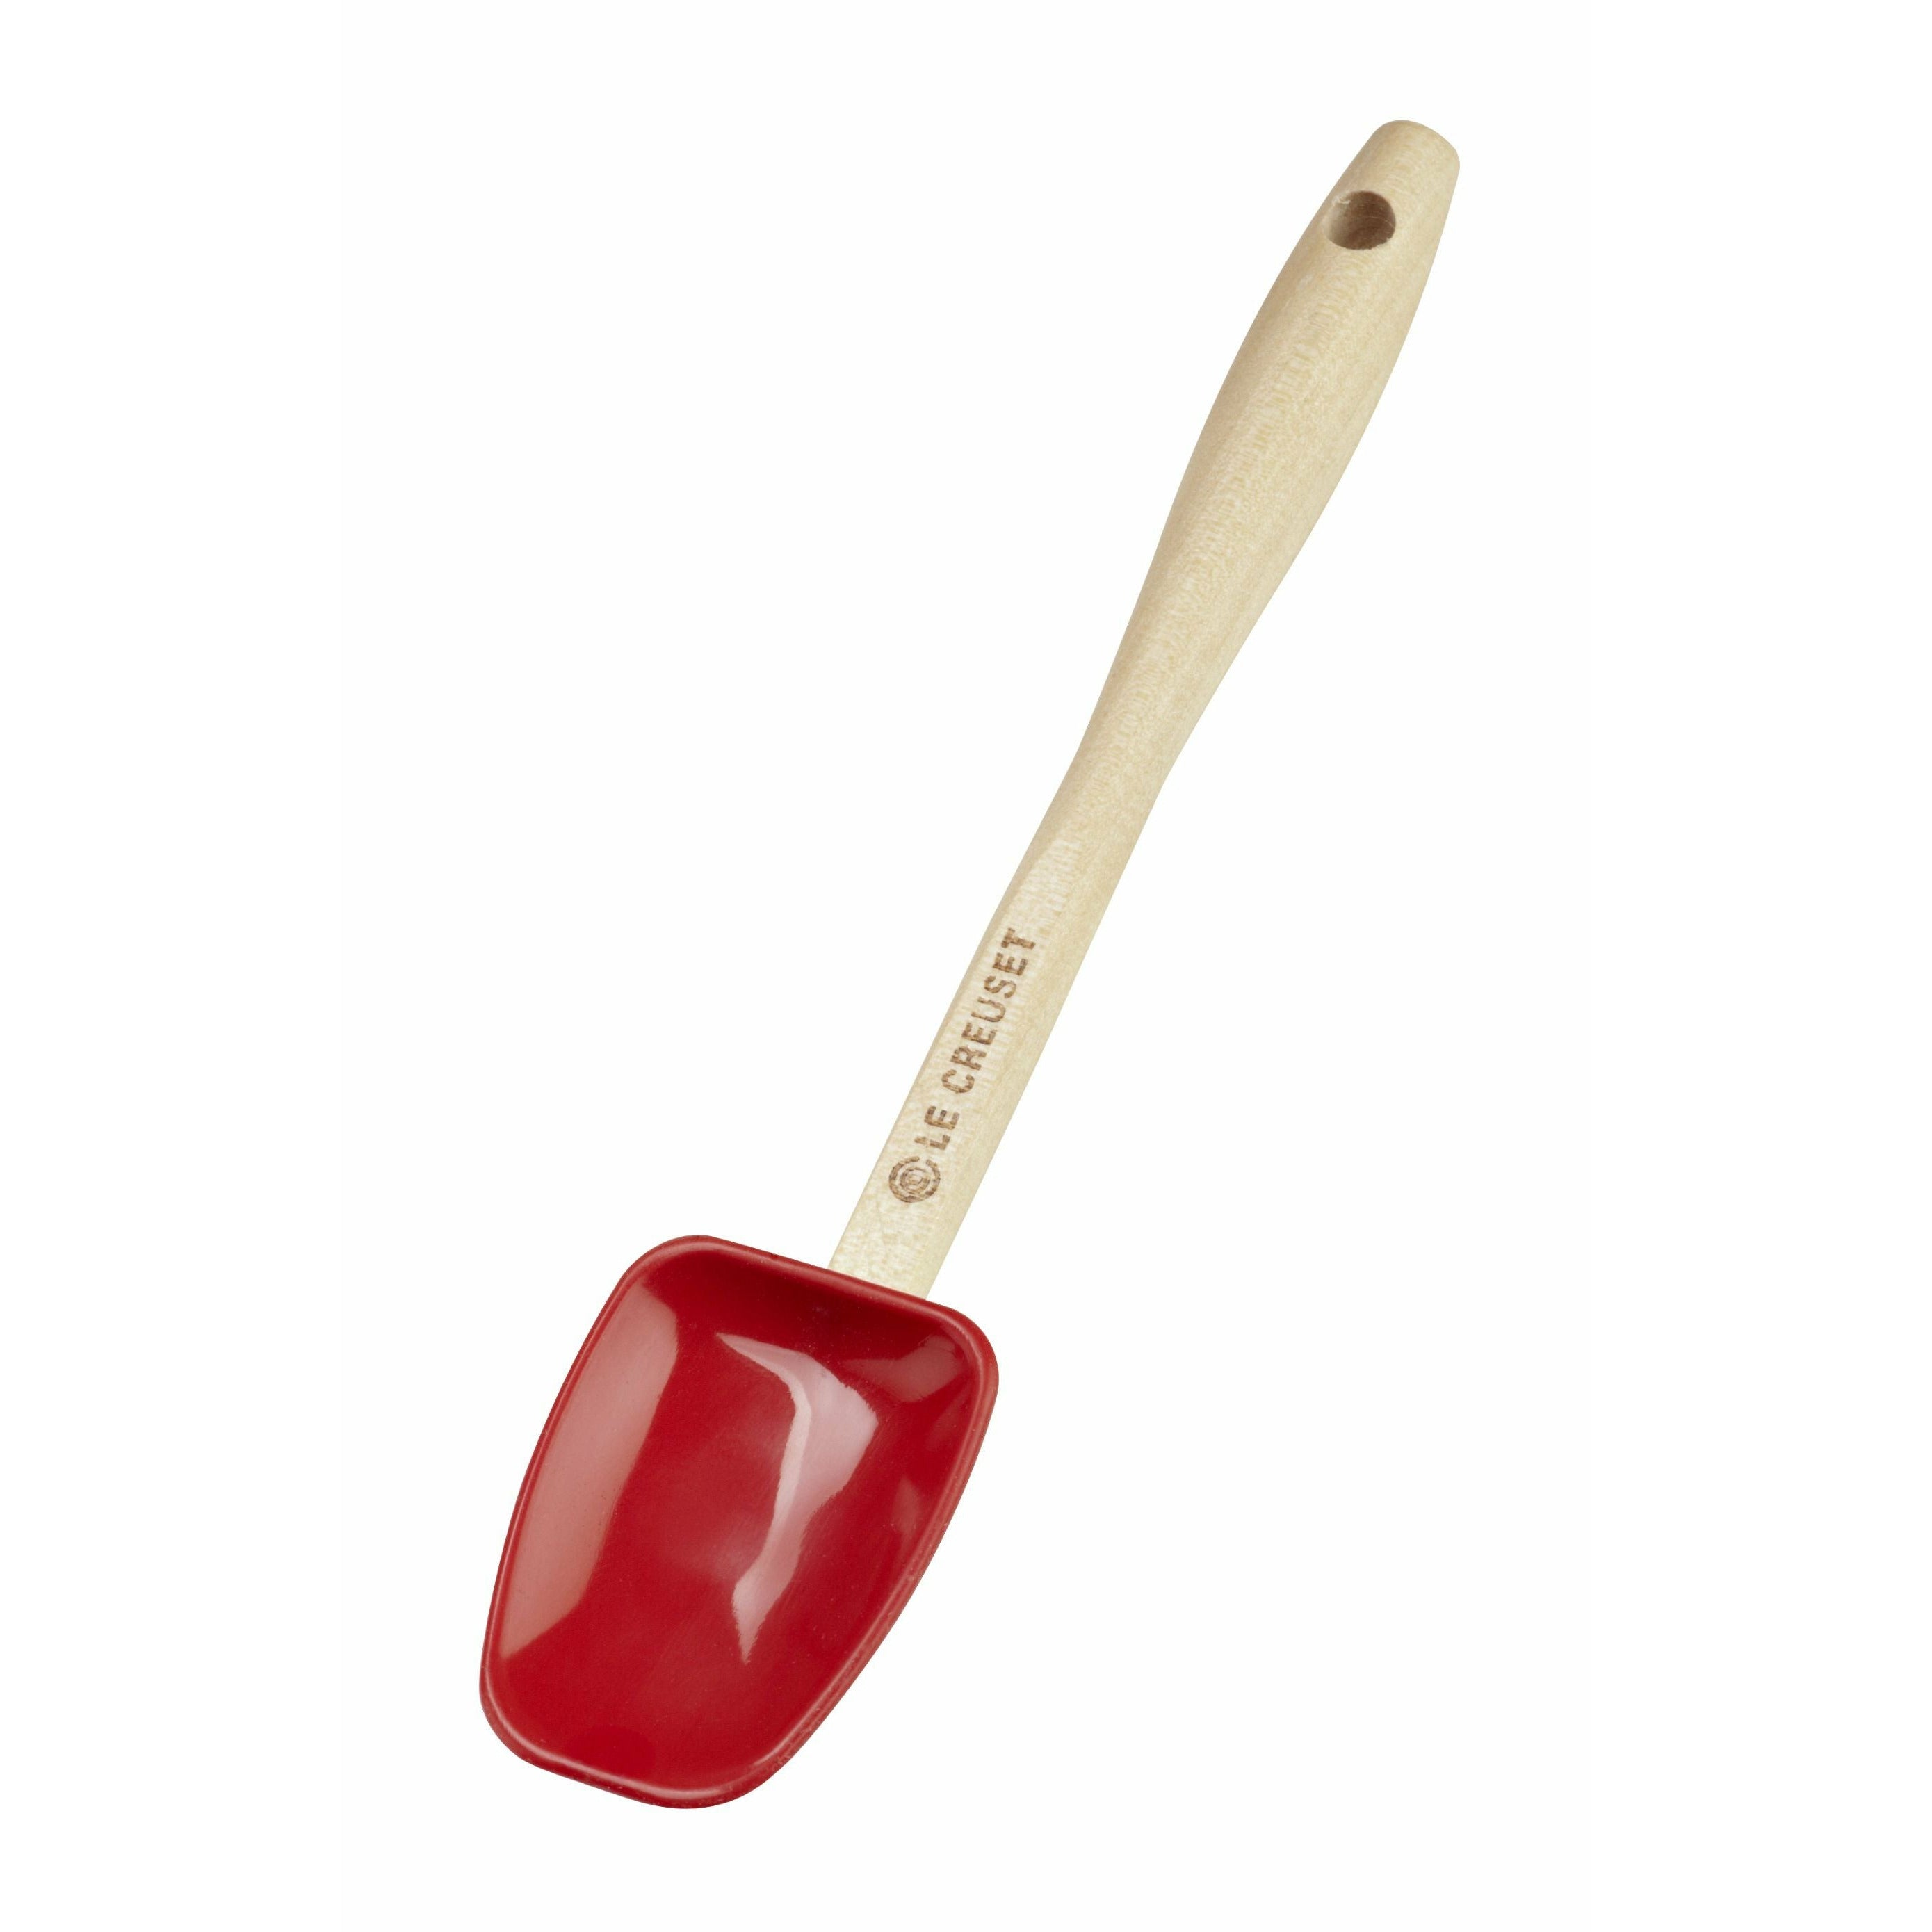 Le Creuset Mini Spoon Wooden Spoon Classic, Cherry Red